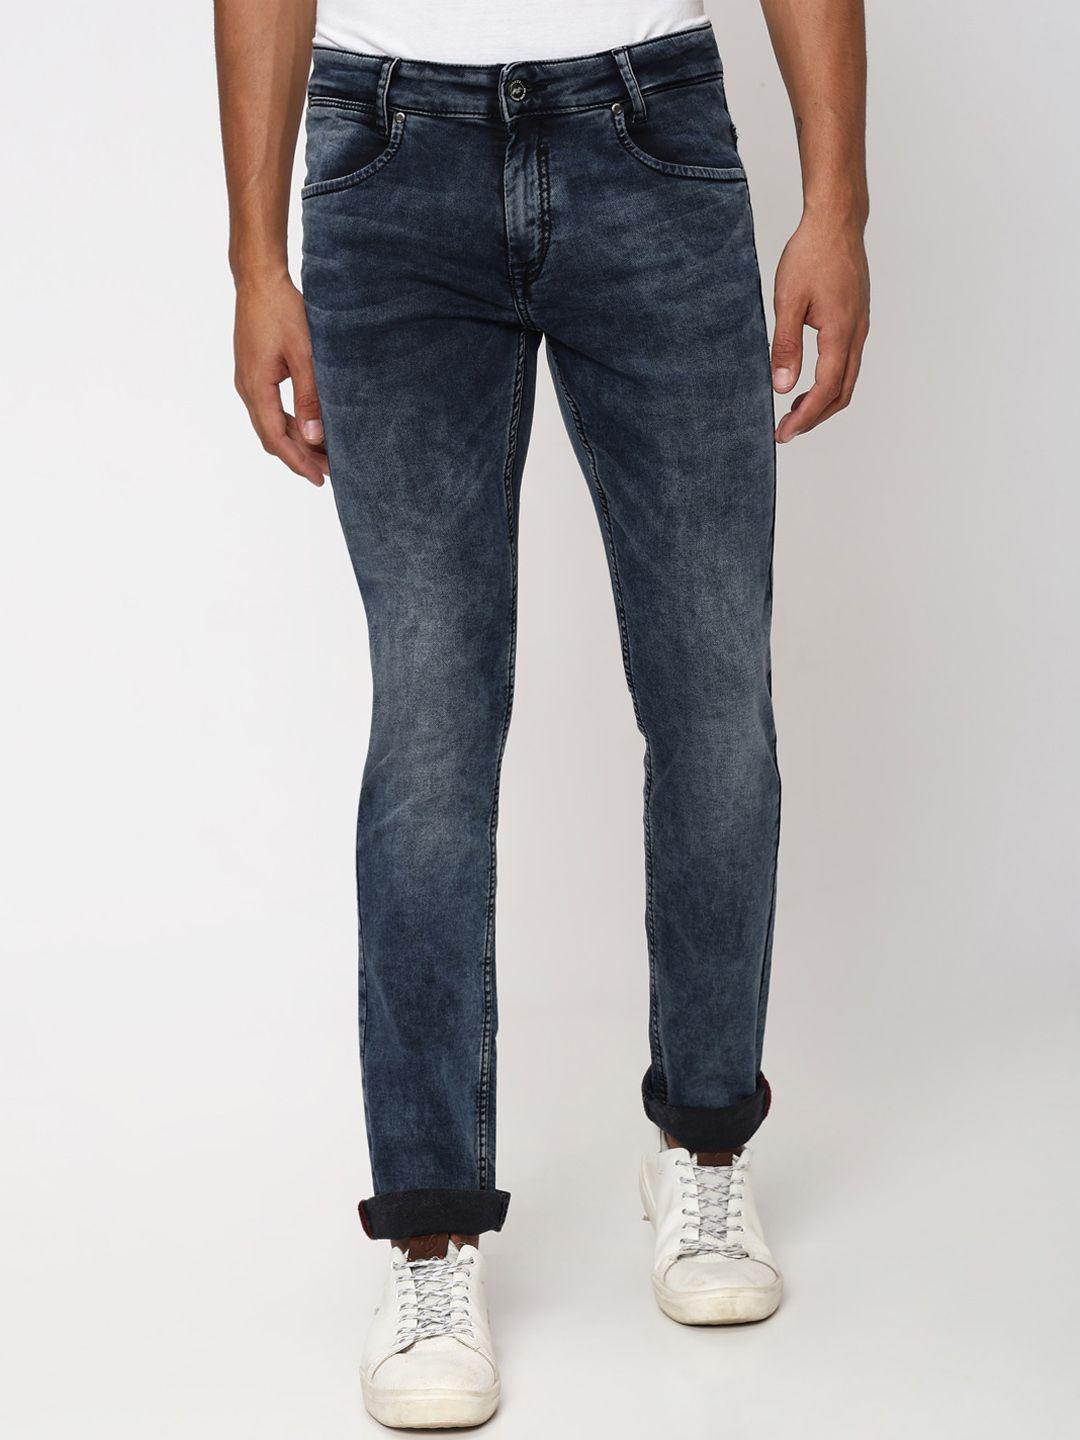 mufti-men-slim-fit-mid-rise-heavy-fade-clean-look-stretchable-jeans